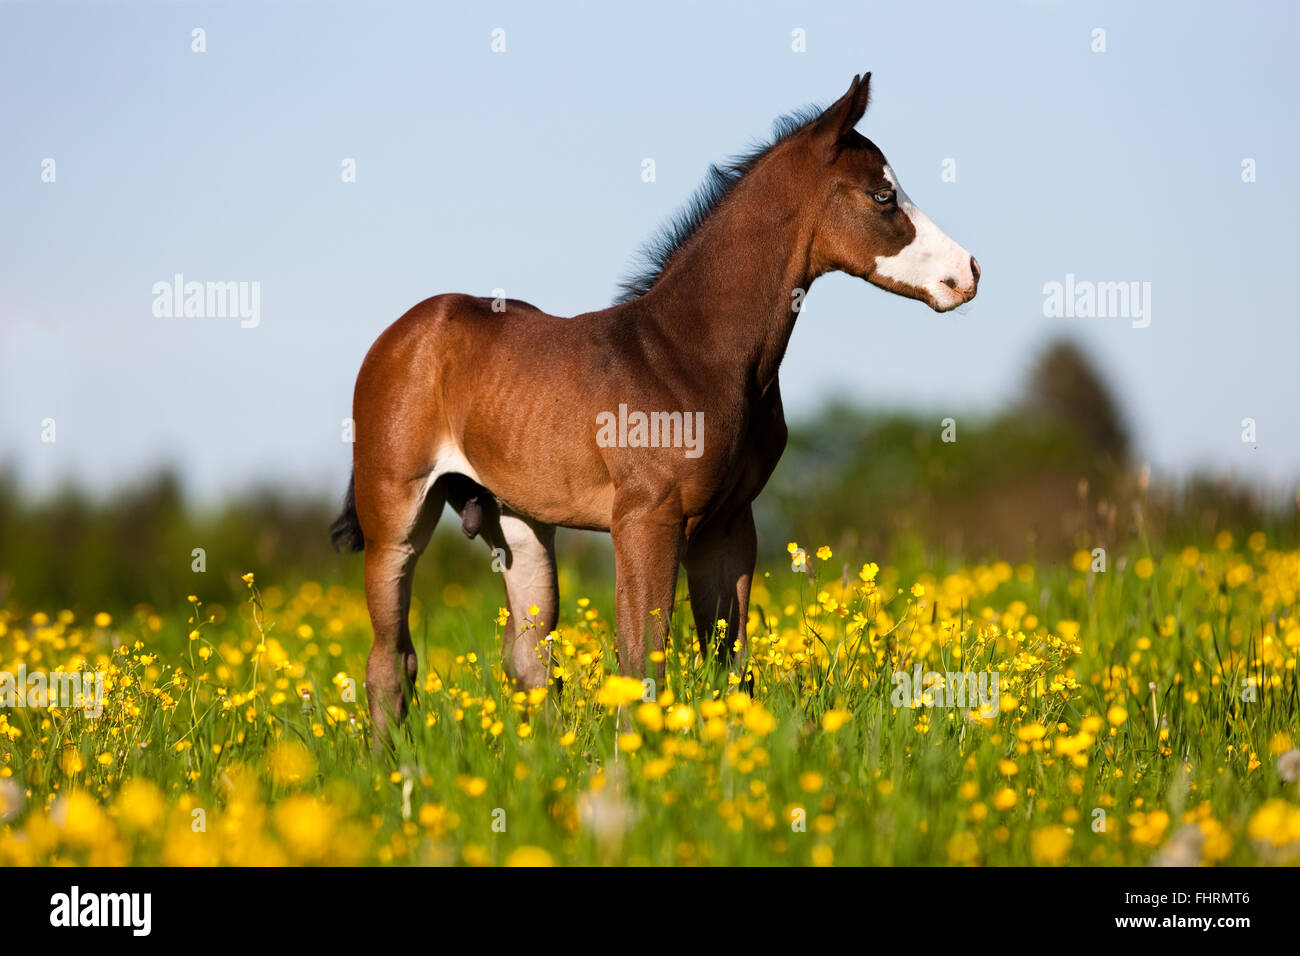 Paint Horse, bay horse, Foal stands in flower meadow Stock Photo